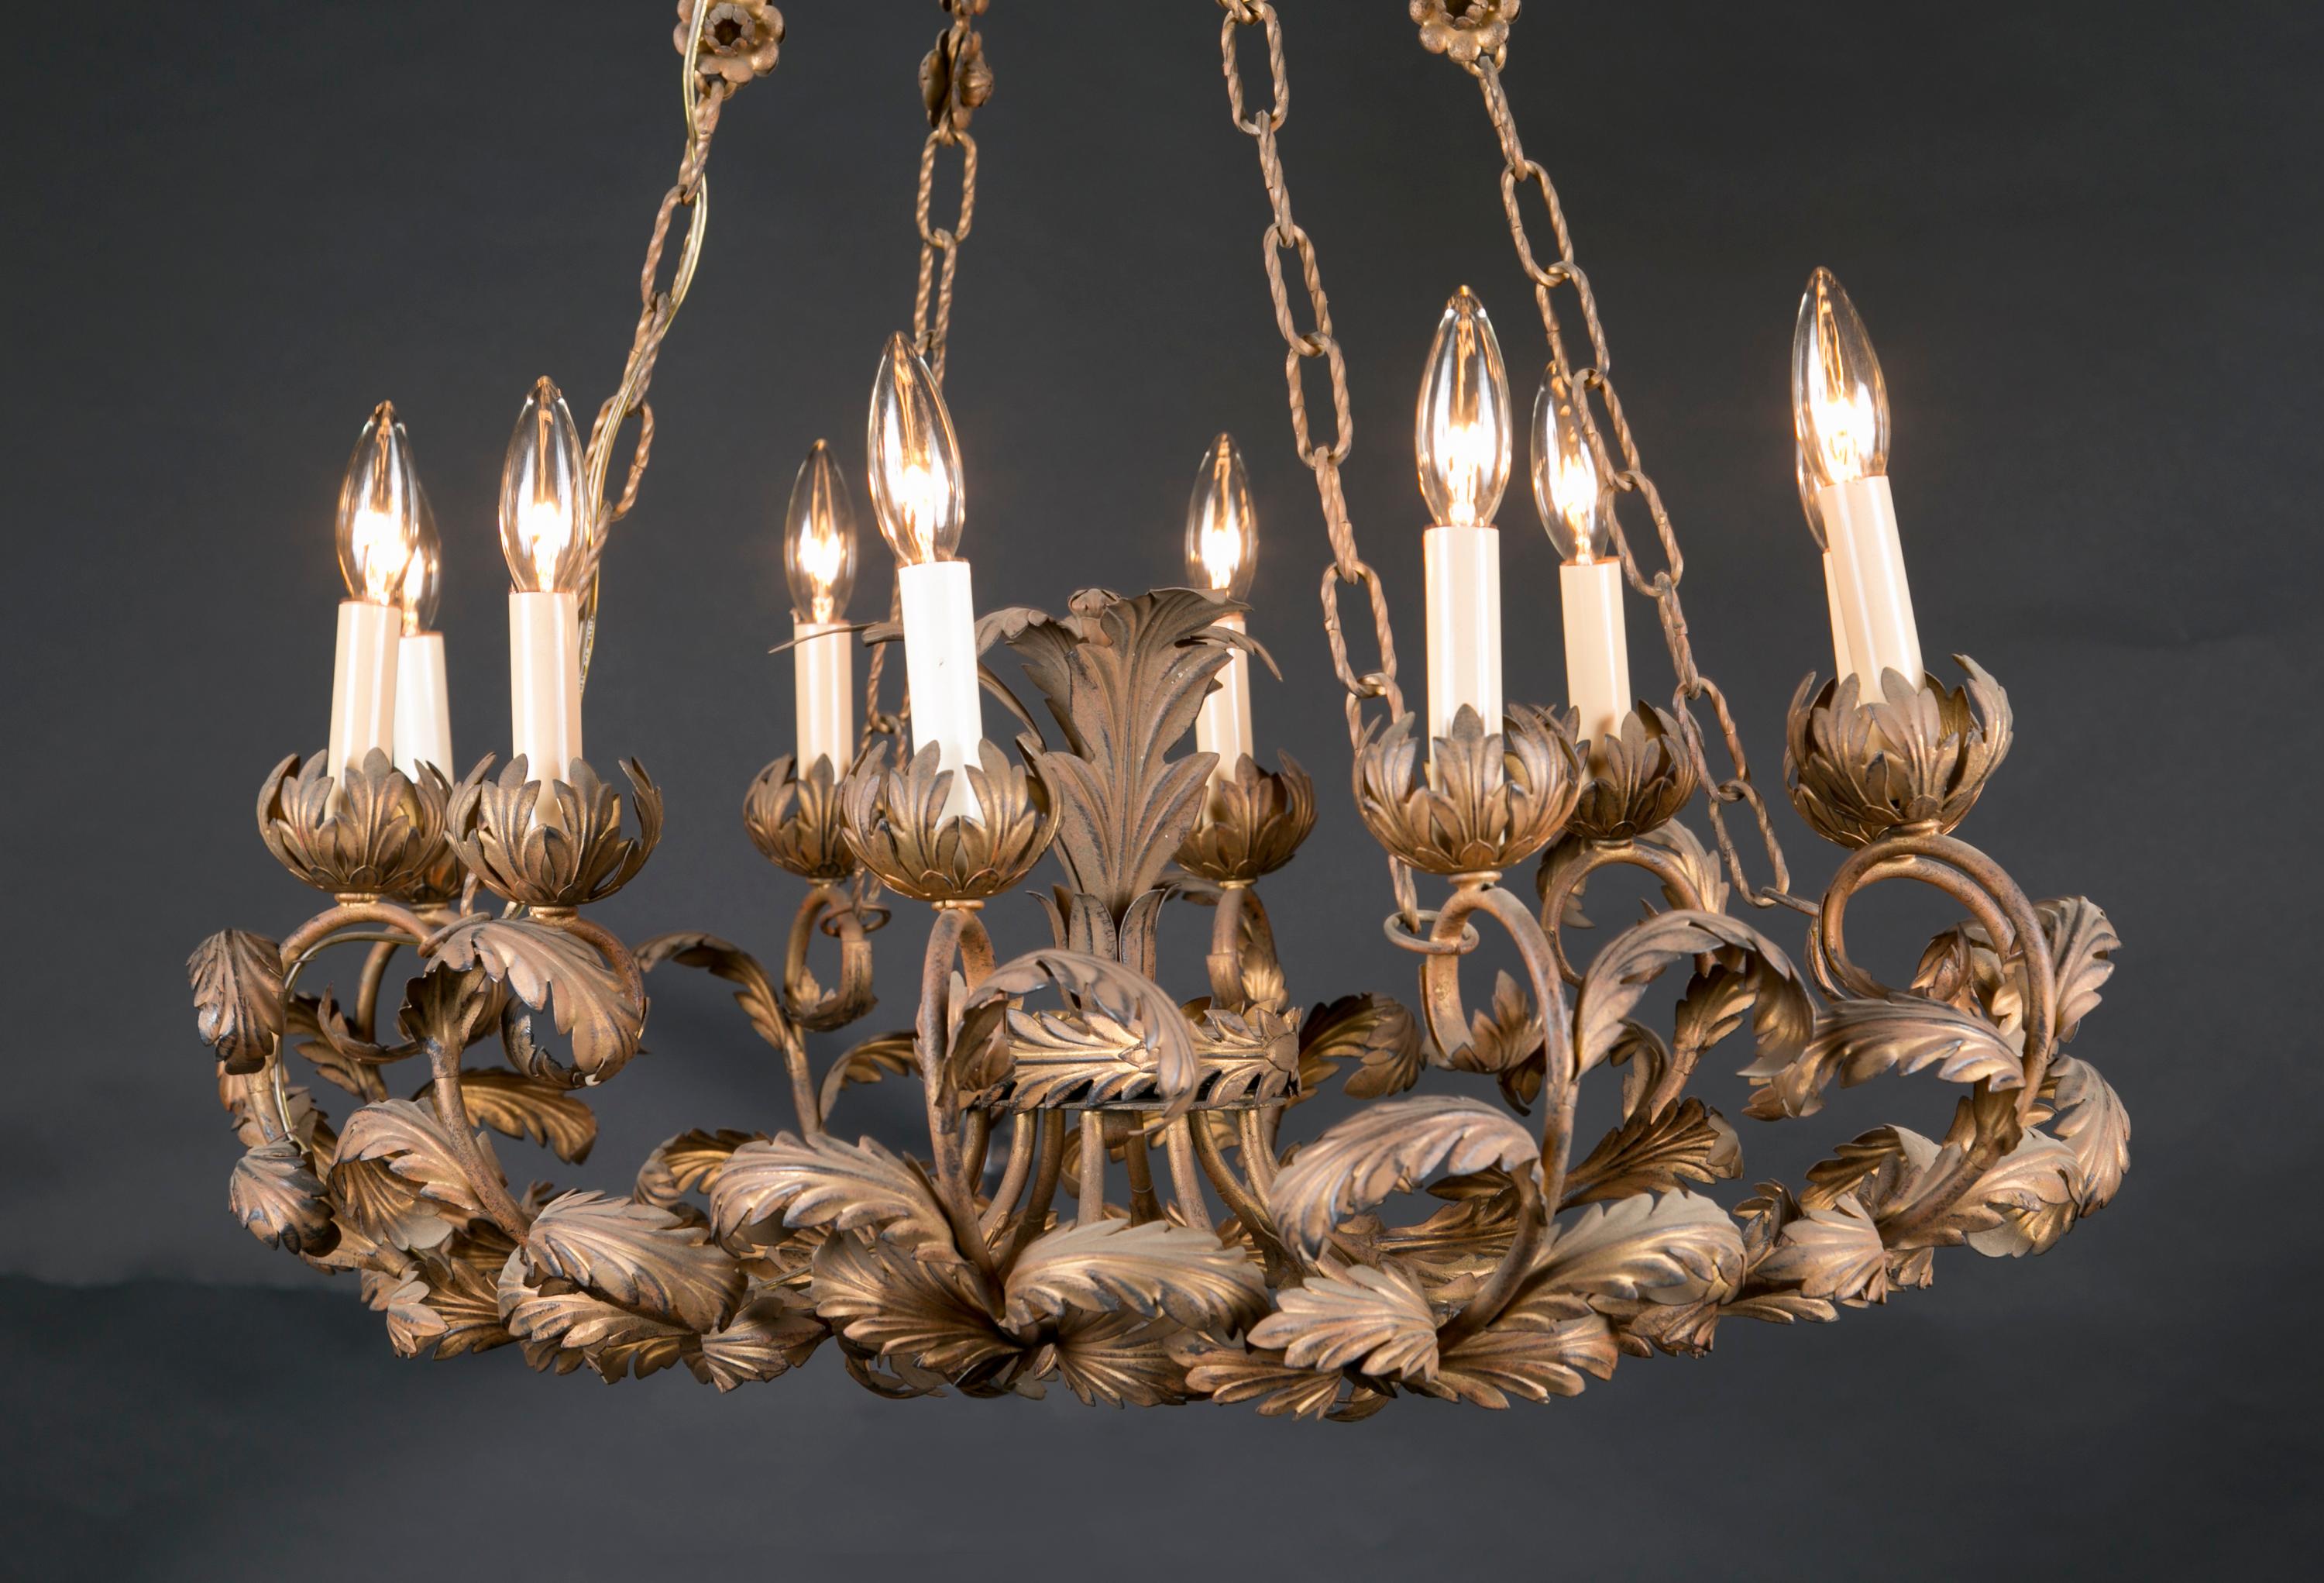 This beautiful floriate Italian chandelier is made of gilded (gold leaf covered) tole and features a forest of leaf bobeches as well as ten (10) lights. The oval fixture dates back to the mid 20th century and is suspended by four chains from a